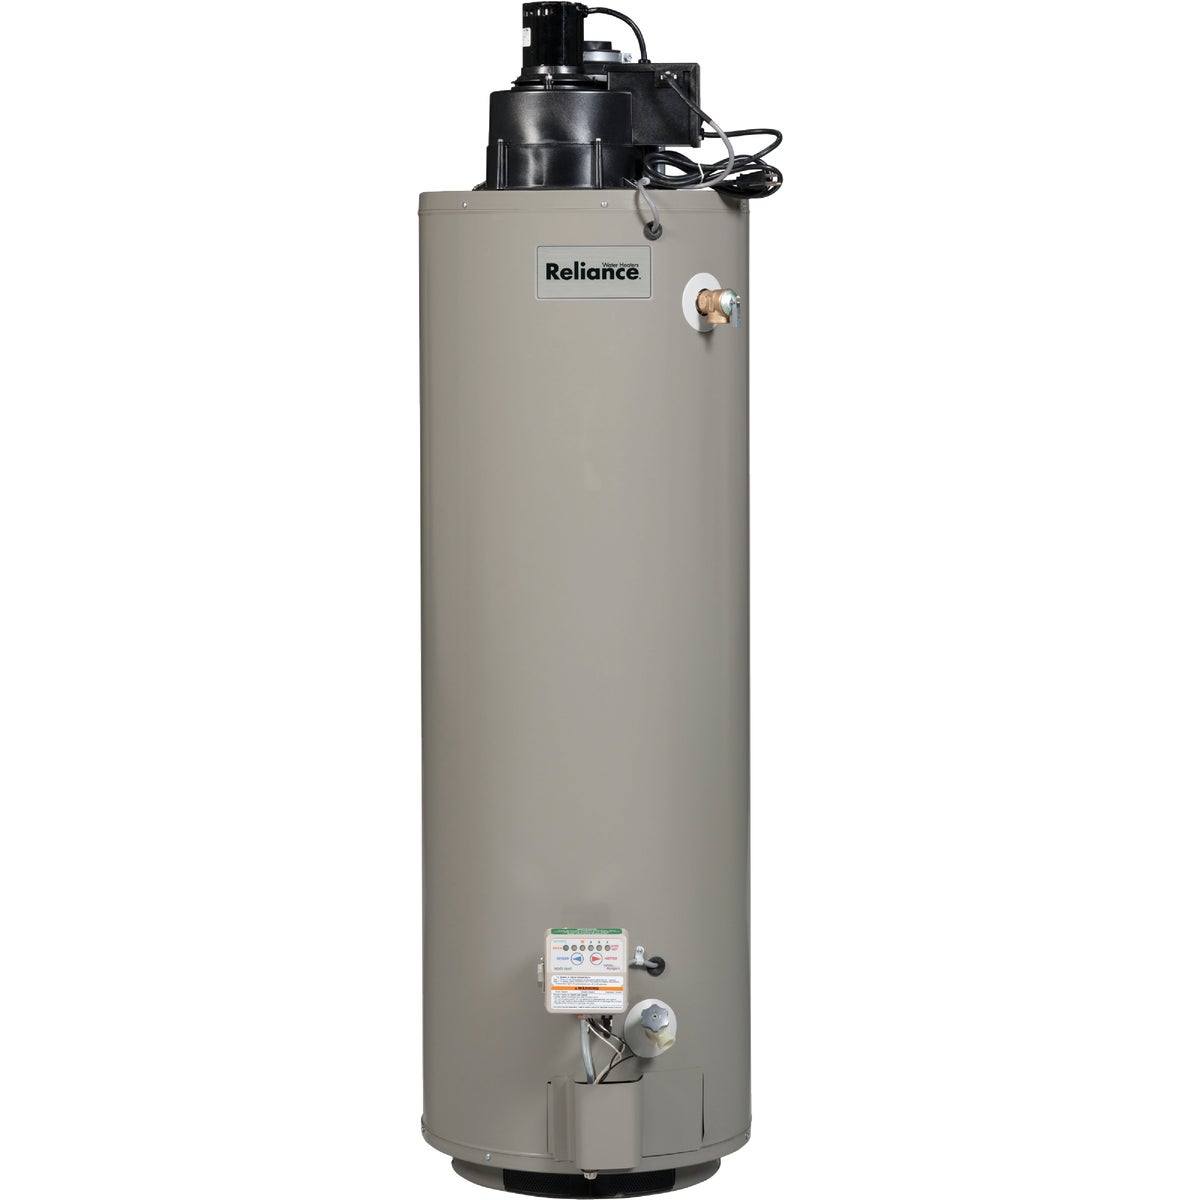 Item 467523, Natural gas water heater with power-vent 3-position (9, 12 and 3 o'clock) 